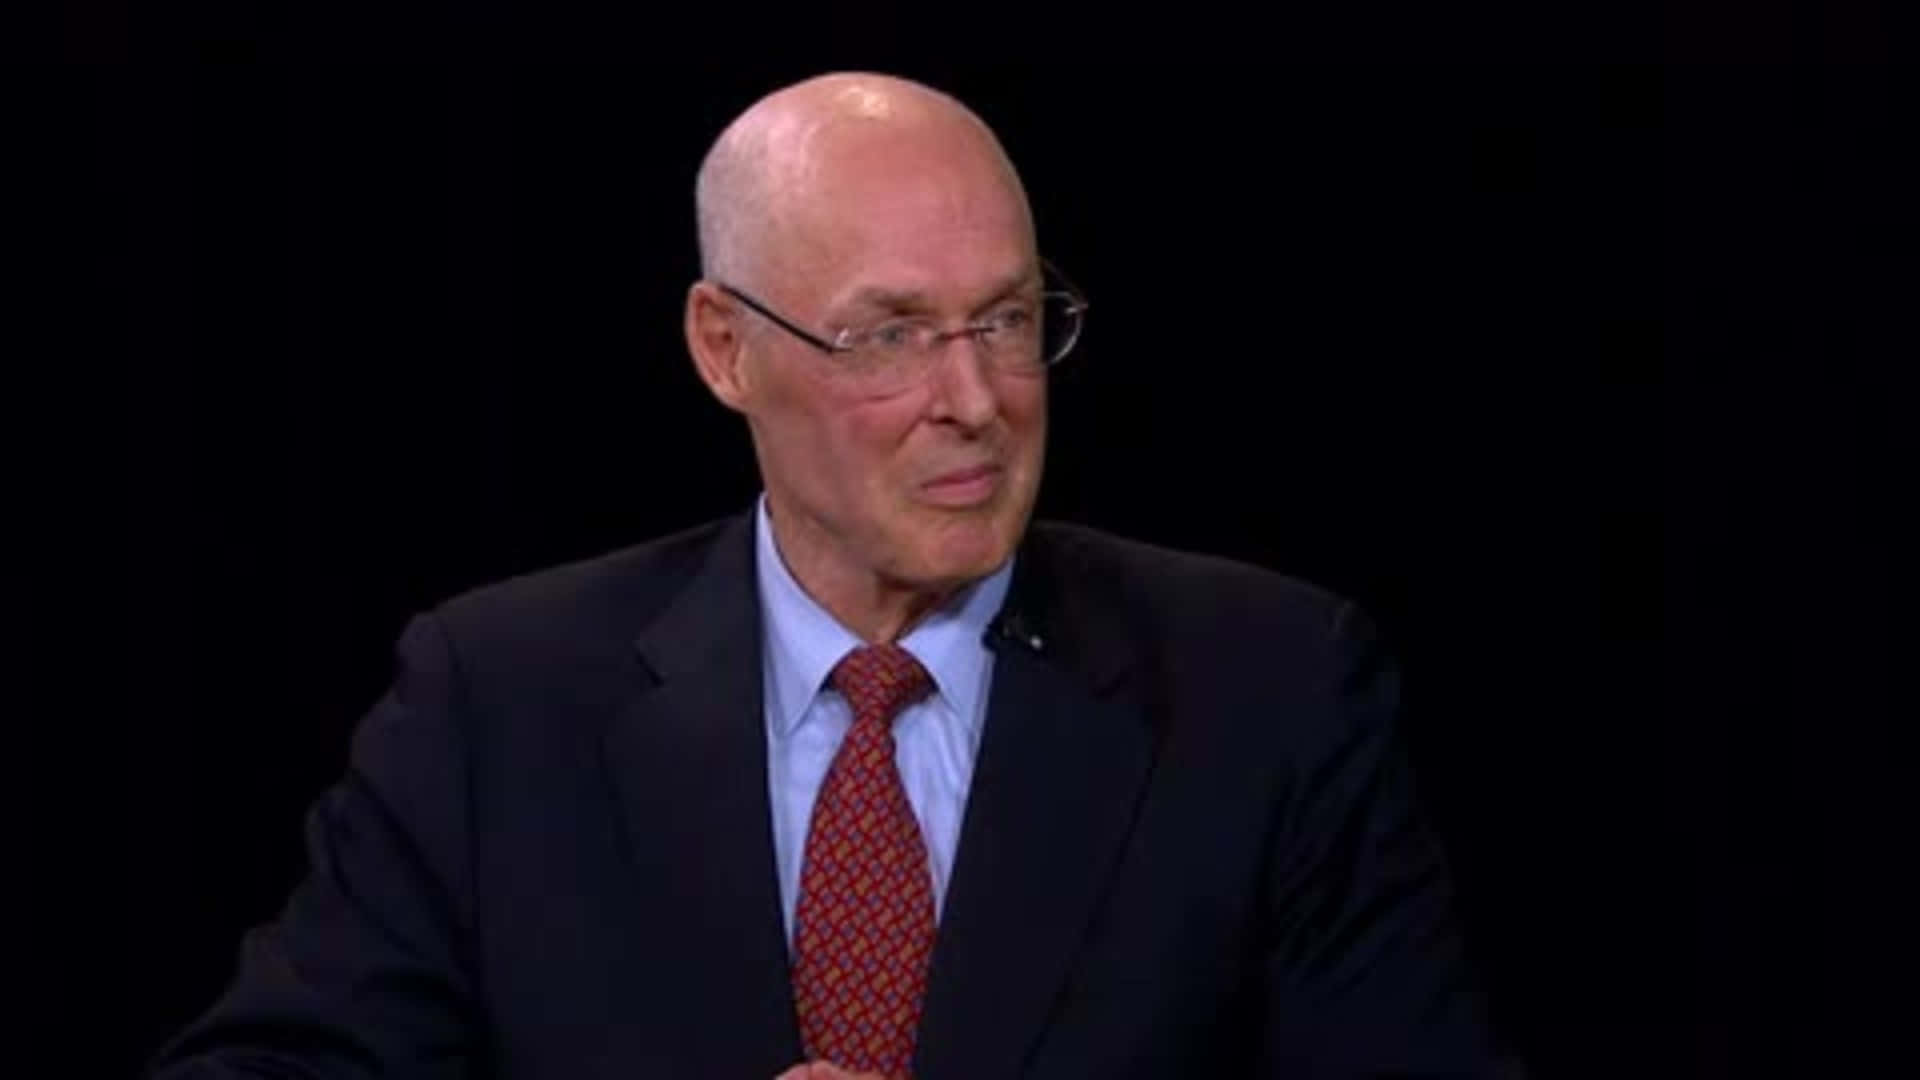 Former US Treasury Secretary Henry Paulson Smiles during an Interview Wallpaper